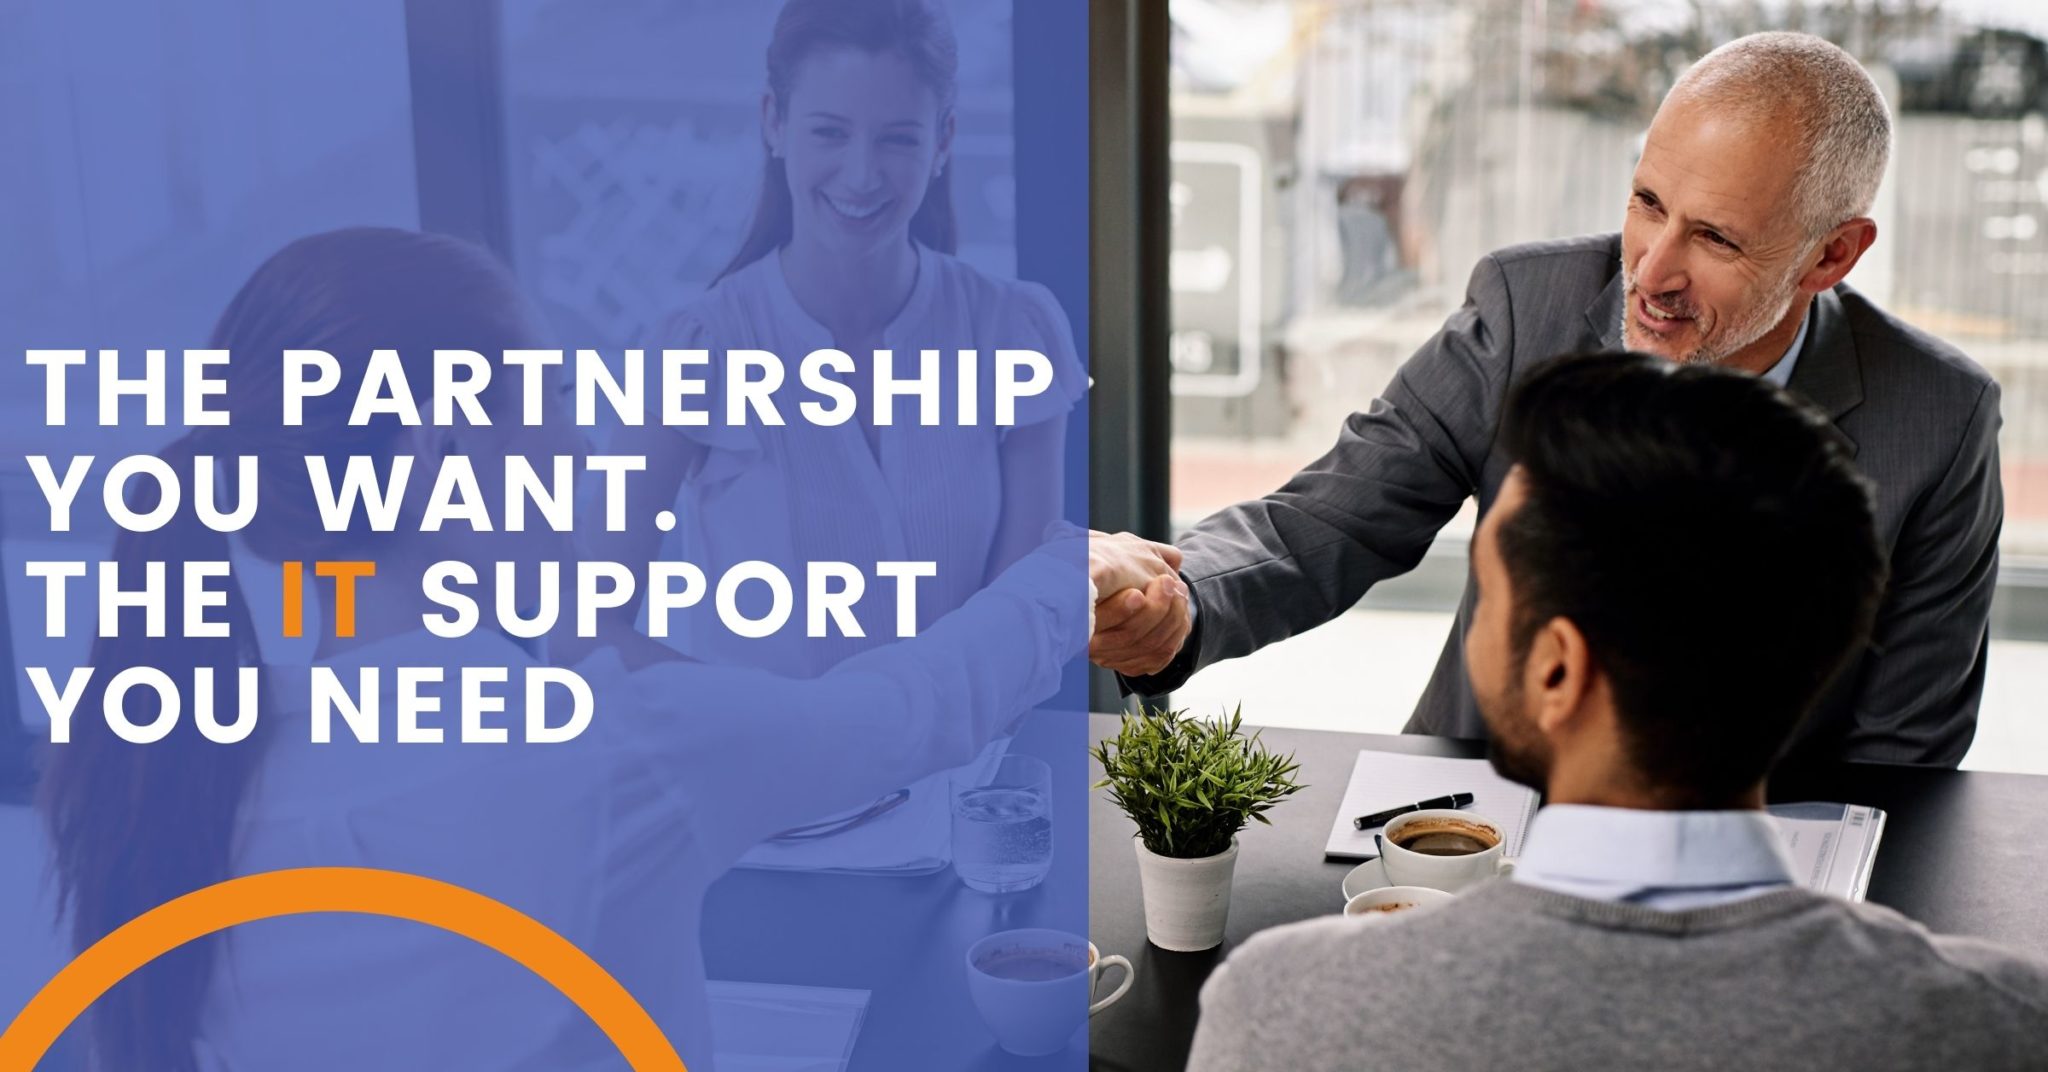 The Partnership You Want. The IT Support You Need